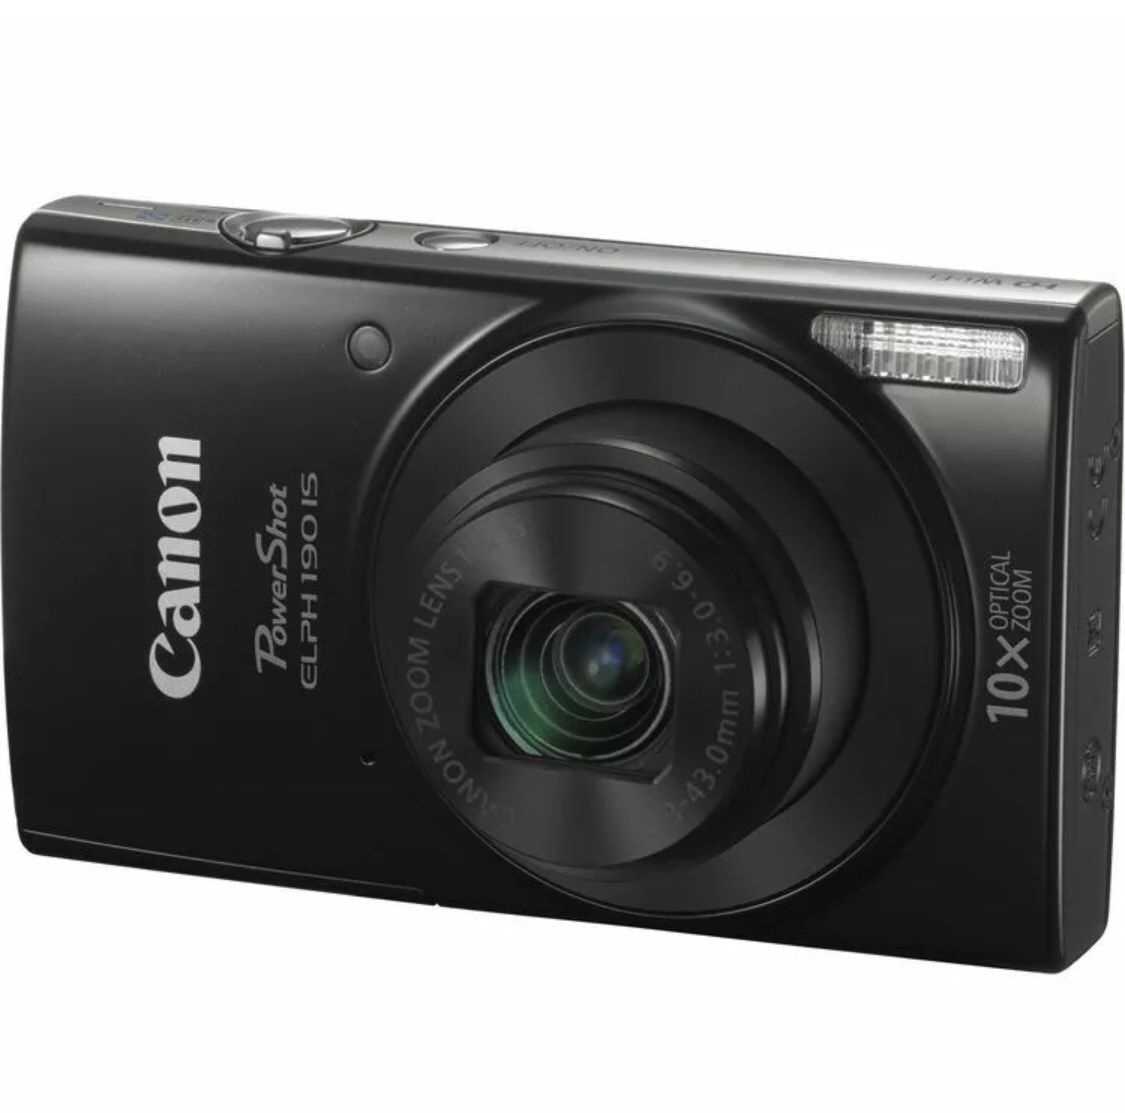 Canon PowerShot ELPH 190 IS Digital Camera 20 MP (Black) Condition is New.